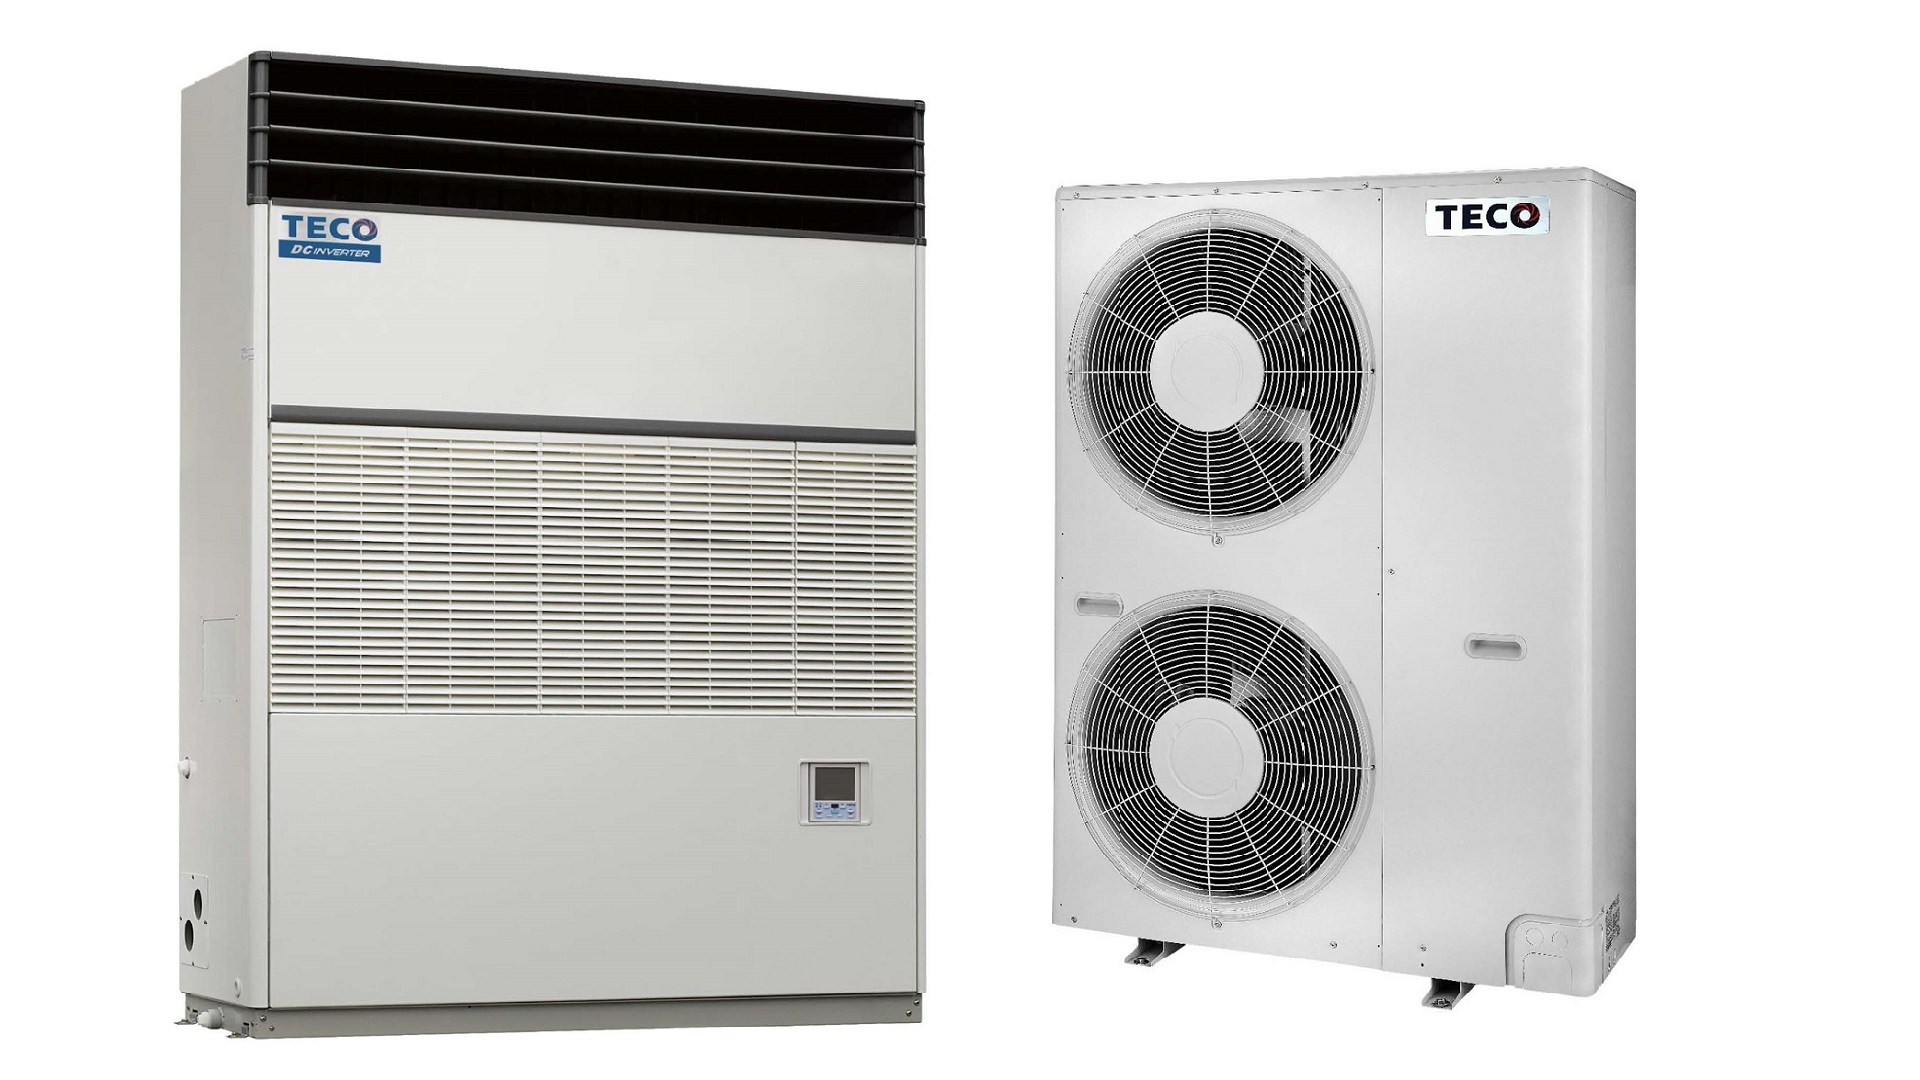 Networking Energy-Saving Air-cooled Inverter ACs